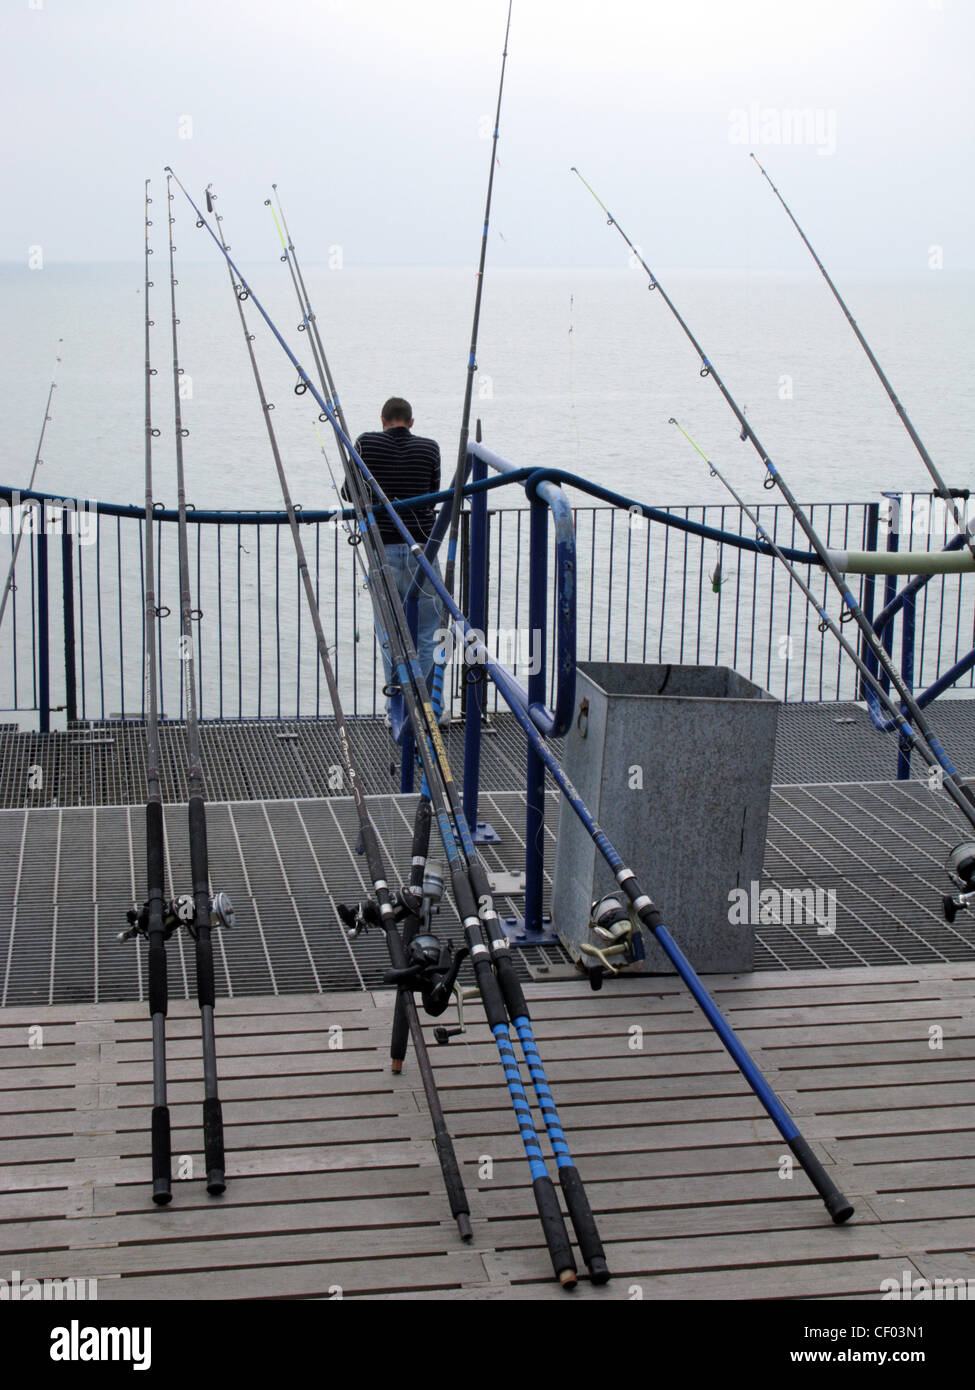 Sea angling. An angler with lots of fishing rods on the pier at